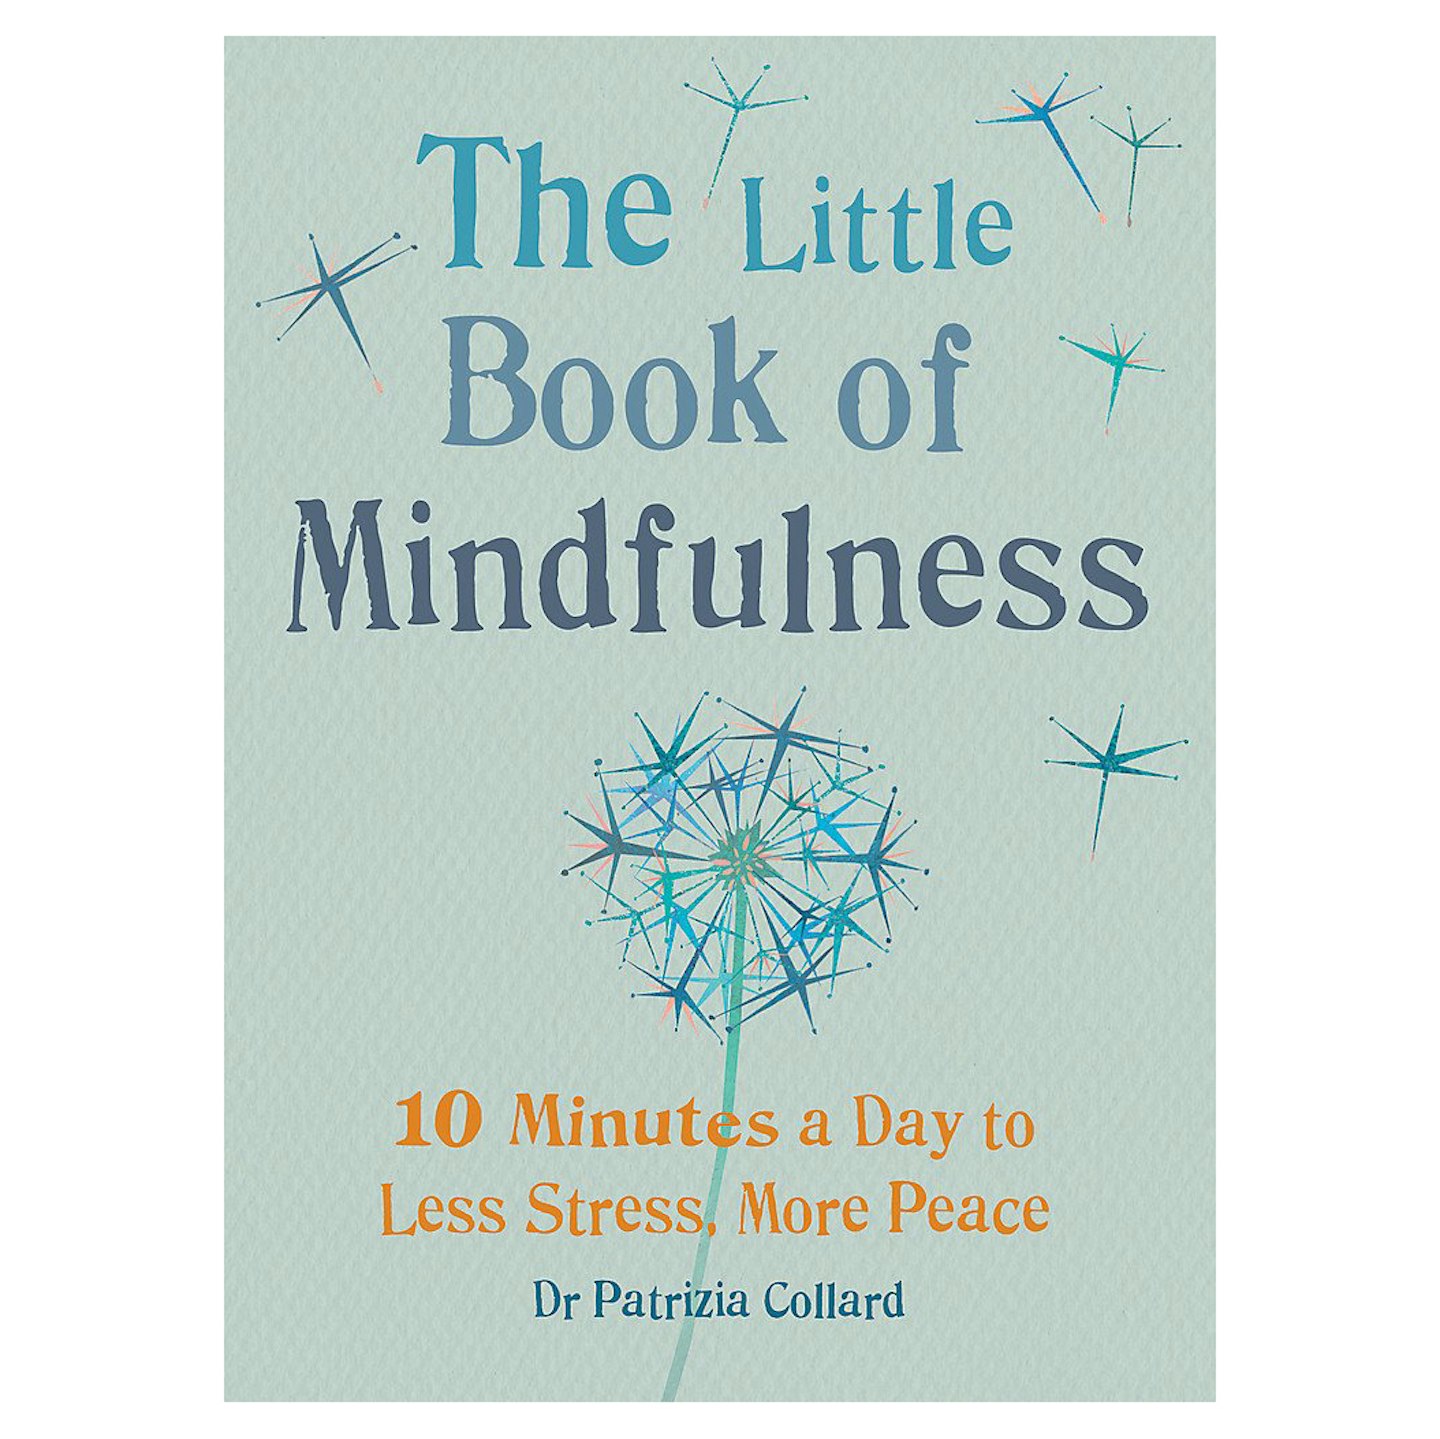 The Little Book of Mindfulness by Patrizia Collard